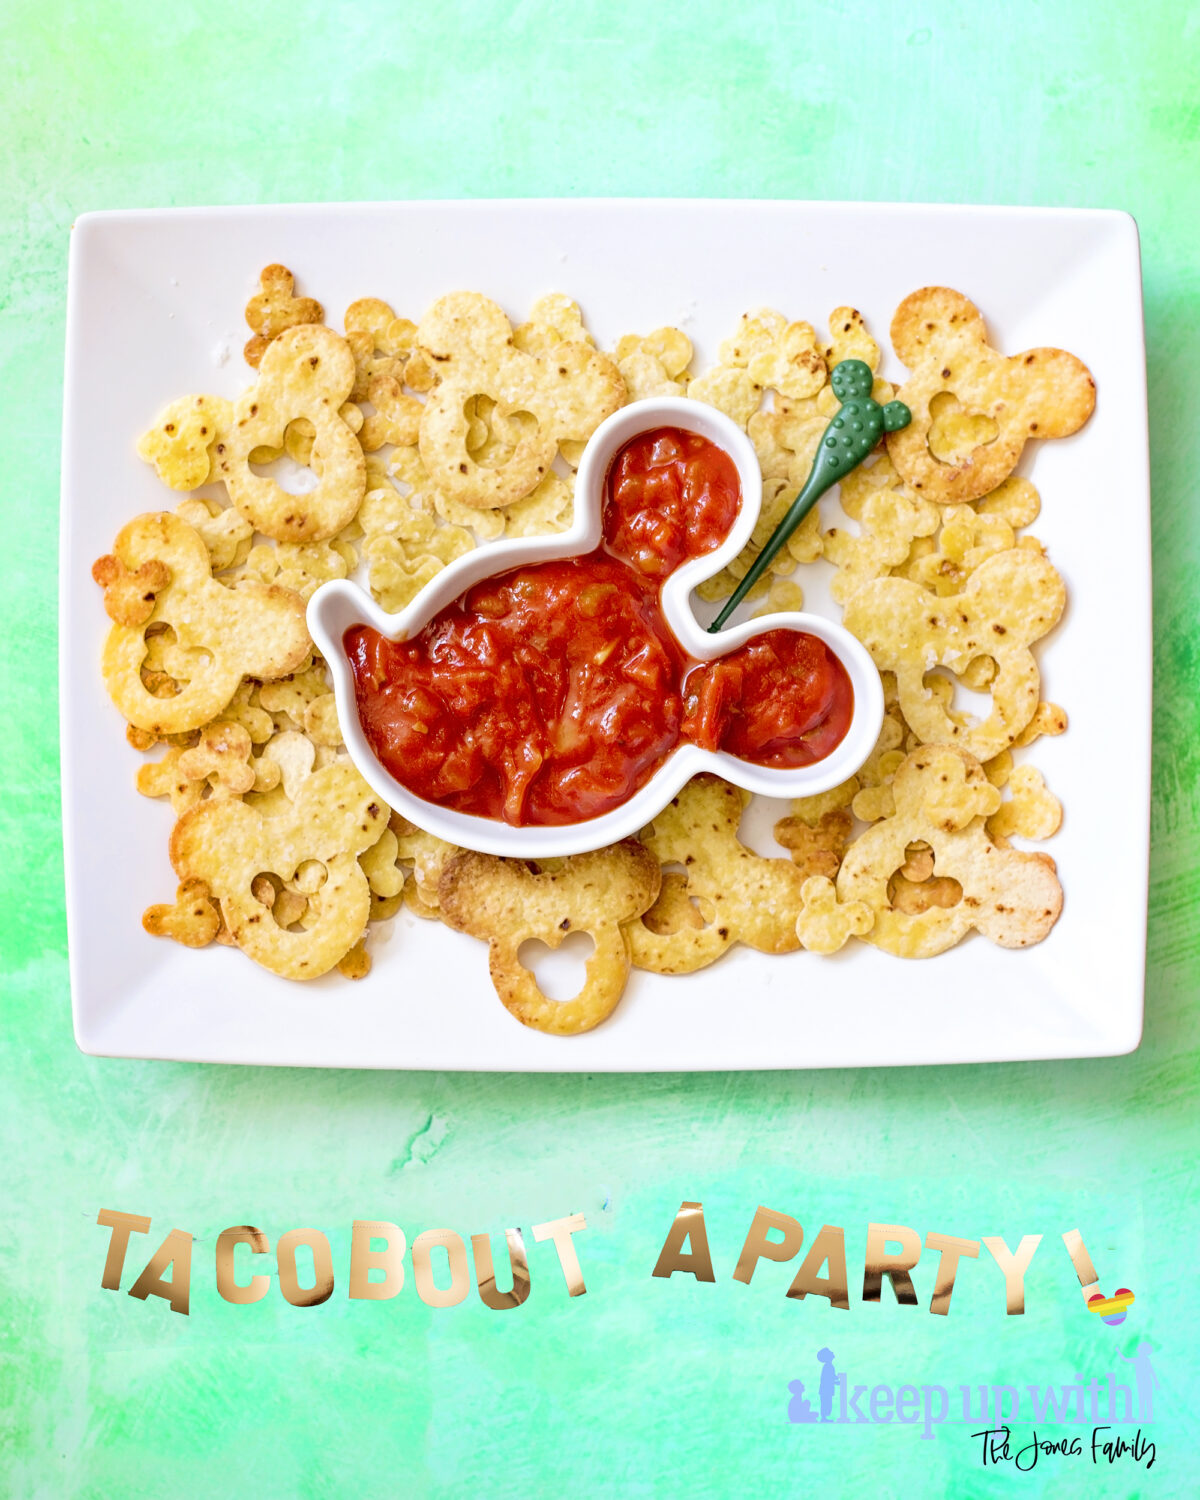 Image shows large rectangular white plate filled with Disney's Mickey Mouse nacho chips and a Mickey Mouse shaped bowl of salsa.  The background is sea green and there is a golden banner across the bottom saying "taco bout a party" for cinco de mayo. Keep up with the jones family.